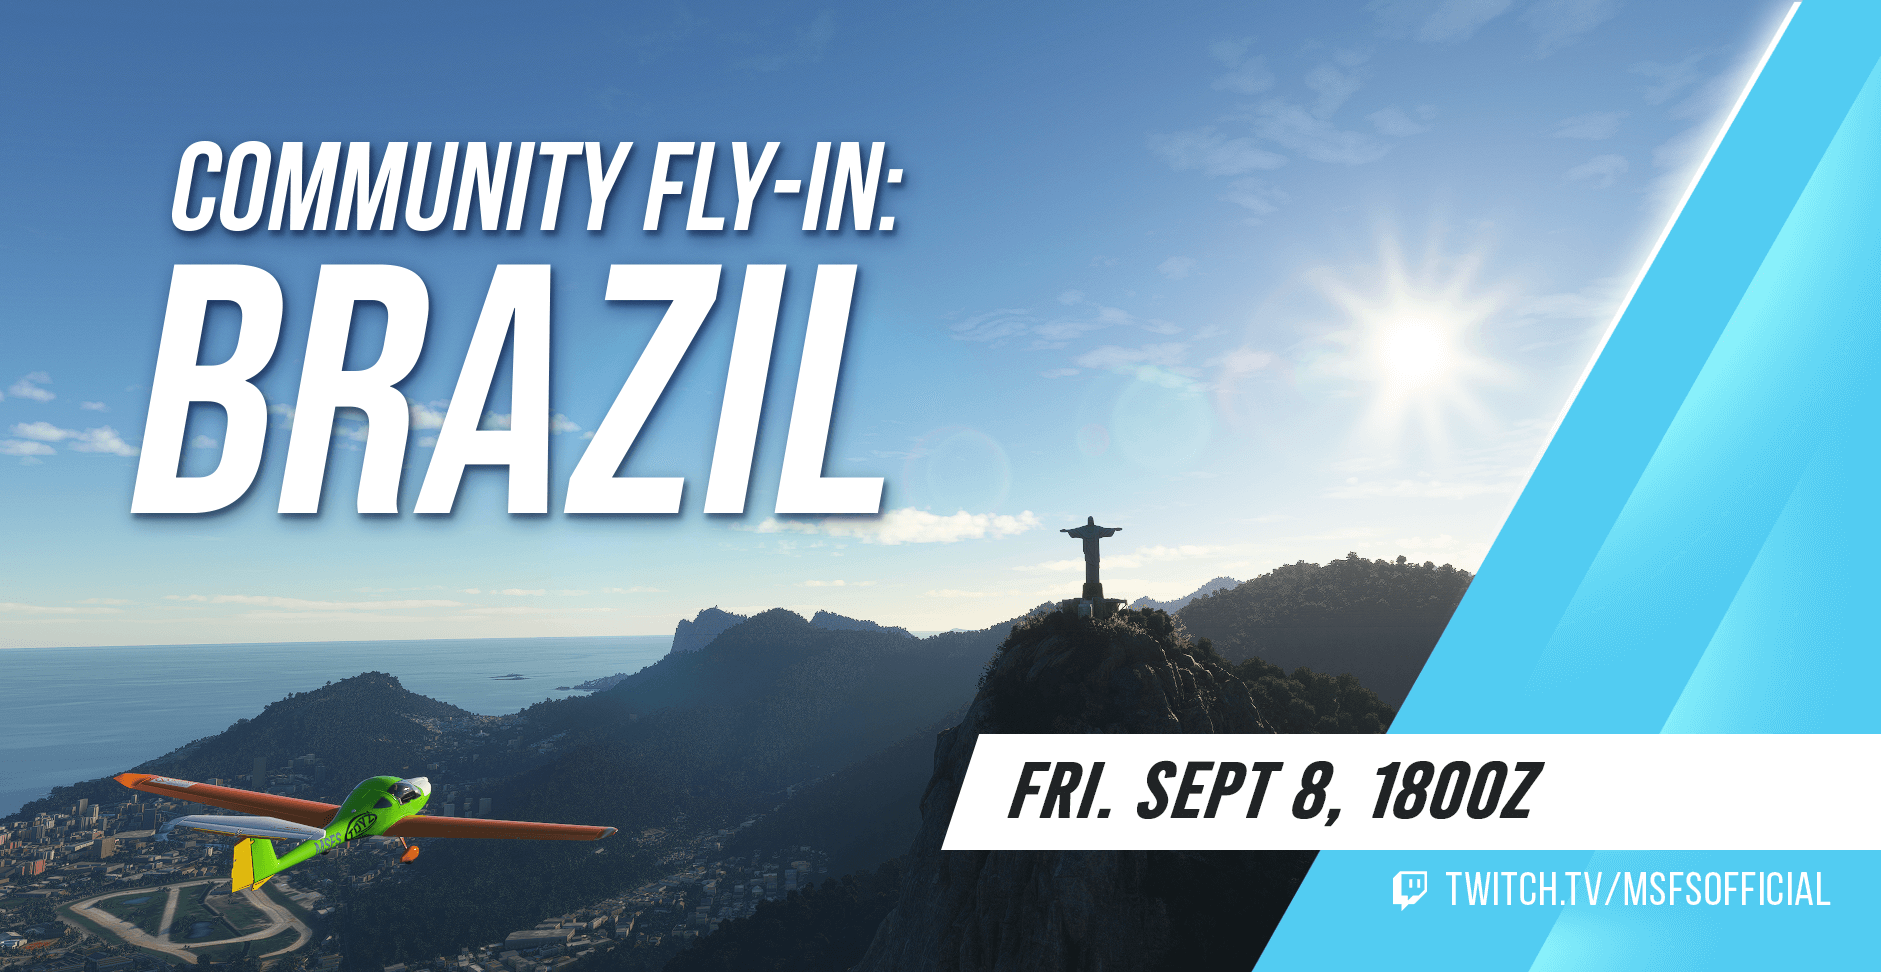 An aircraft flies towards the Christ The Redeemer statue in Rio de Janeiro. Community Fly-In: Brazil. Join us on Friday September 8th at 1800Z. Watch at twitch.tv/msfsofficial!